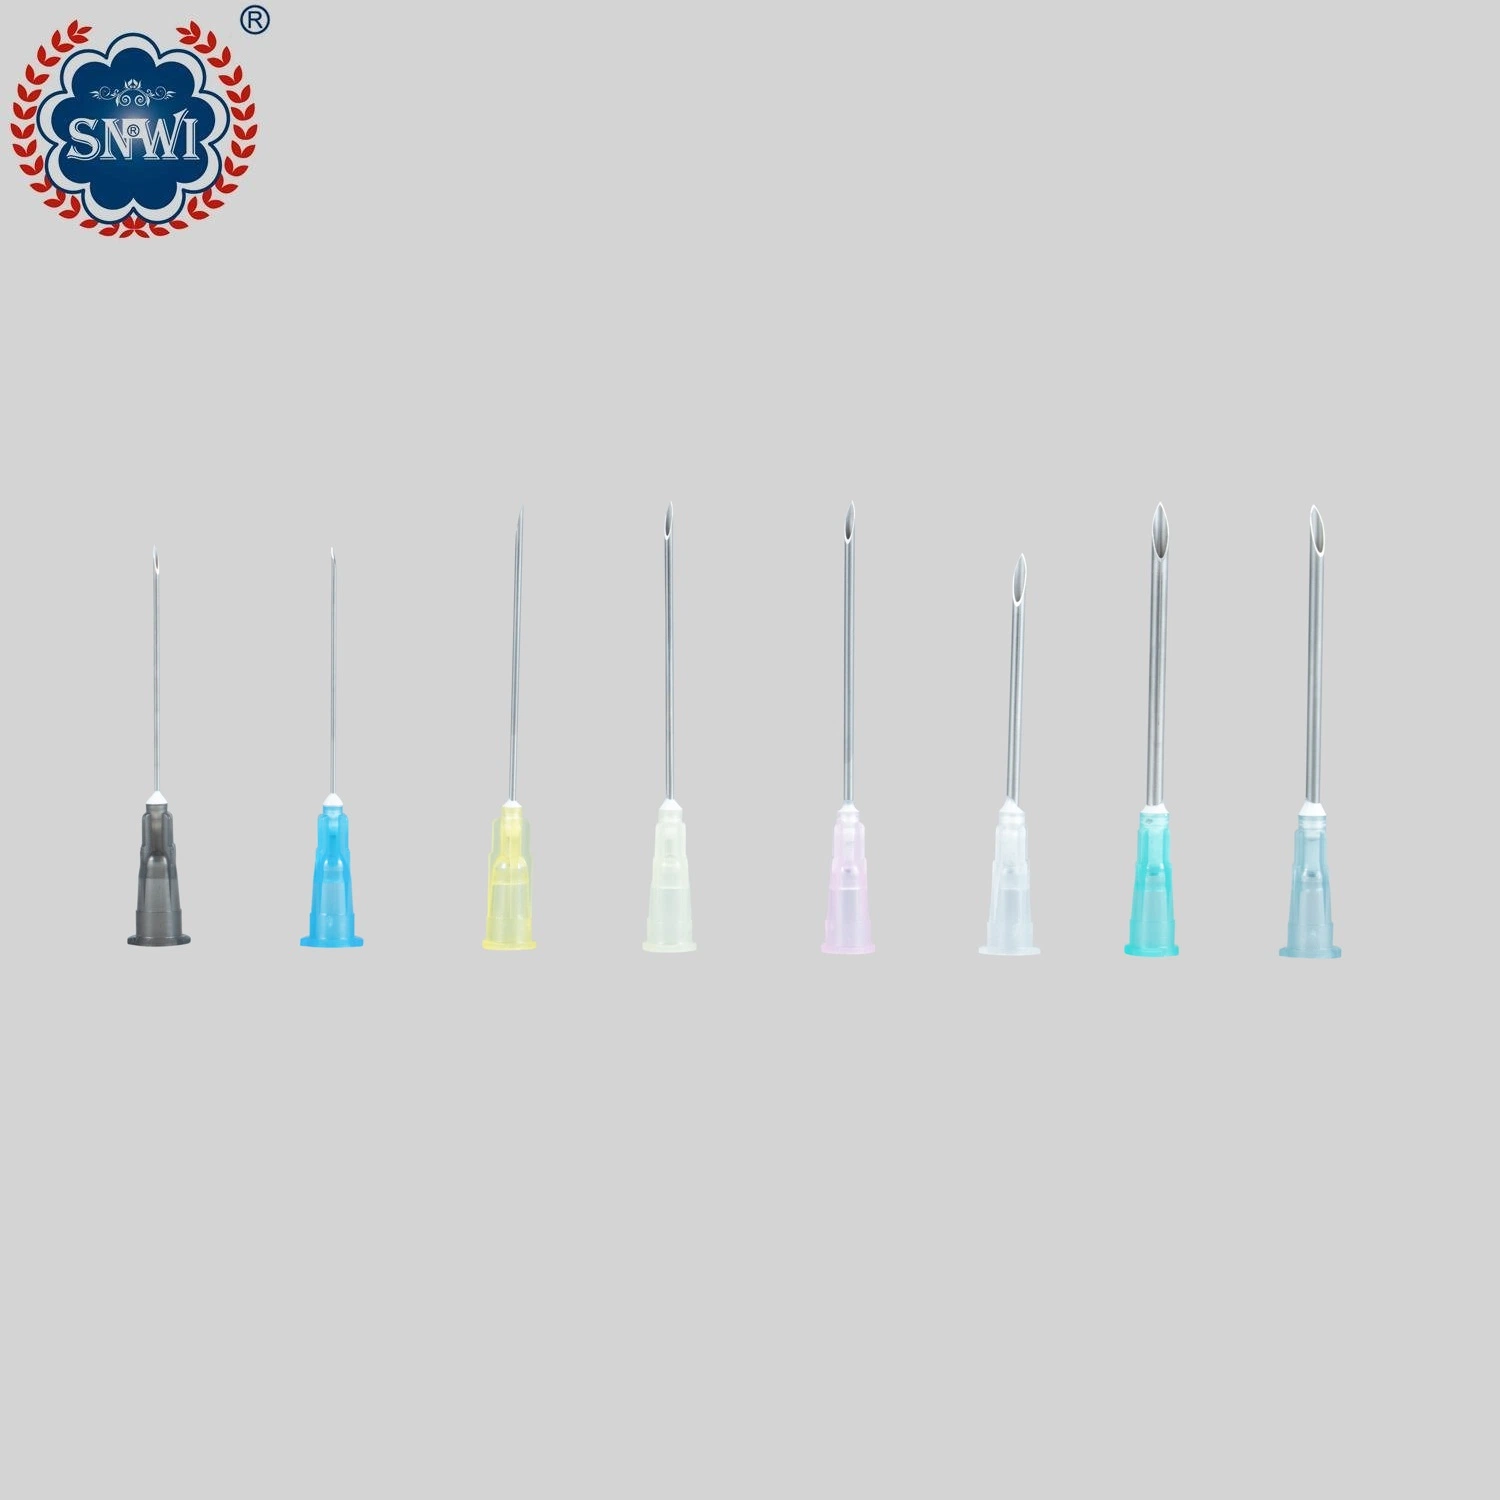 Disposable Medical Sterile Plastic Syringe Hypodermic Injection Needle with CE ISO Approved